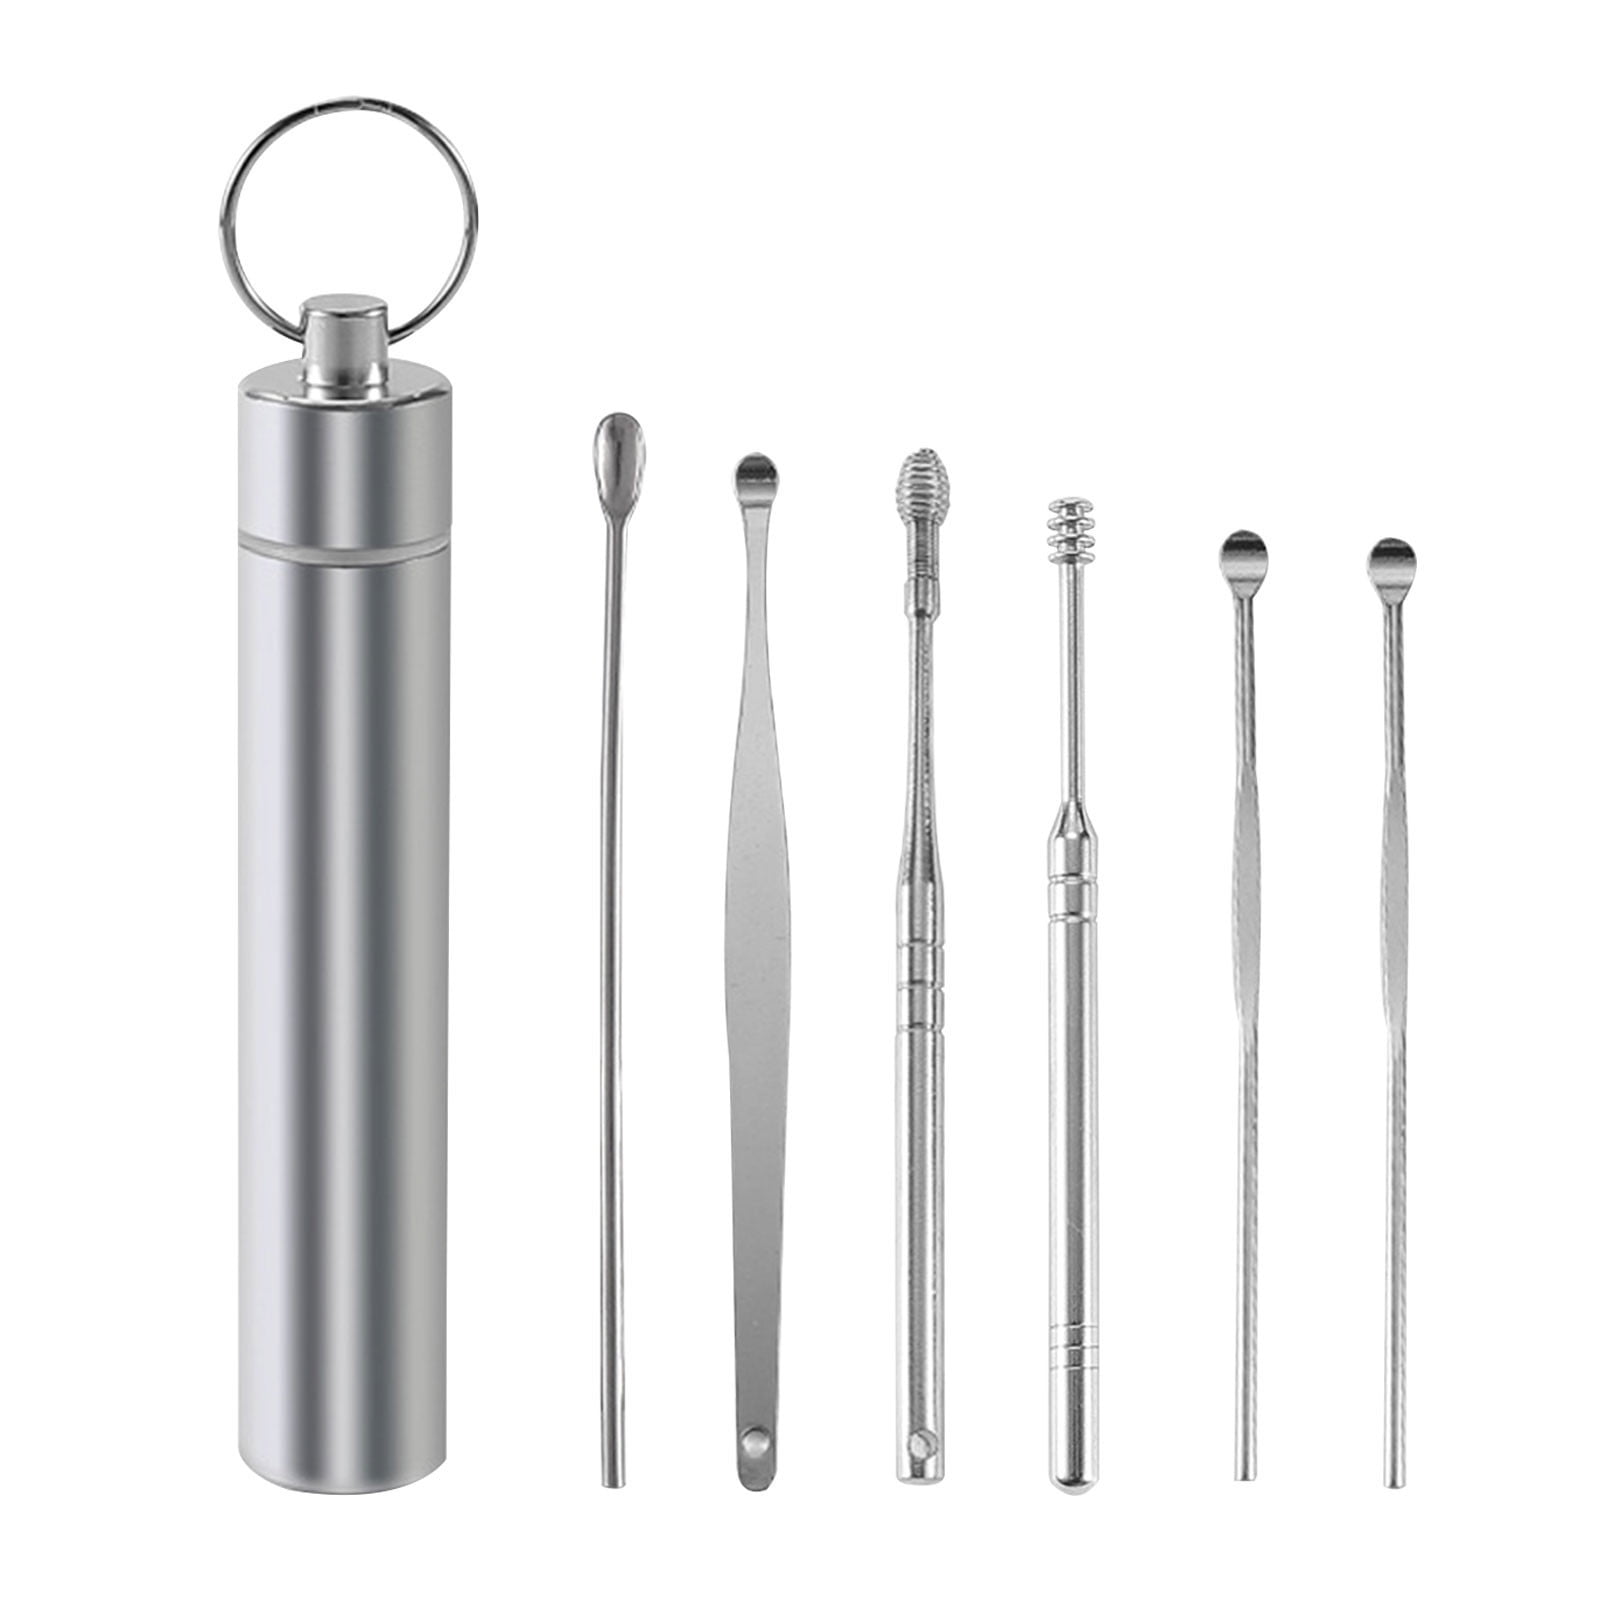 6 Pieces Ear Picker Ear Wax Removal Kit, Reusable Ear Wax Cleaning Tools Set,  360° Spiral Design Ear Canal Cleaner Stainless Steel Ear Wax Remover,  Suitable for Kids and Adults 